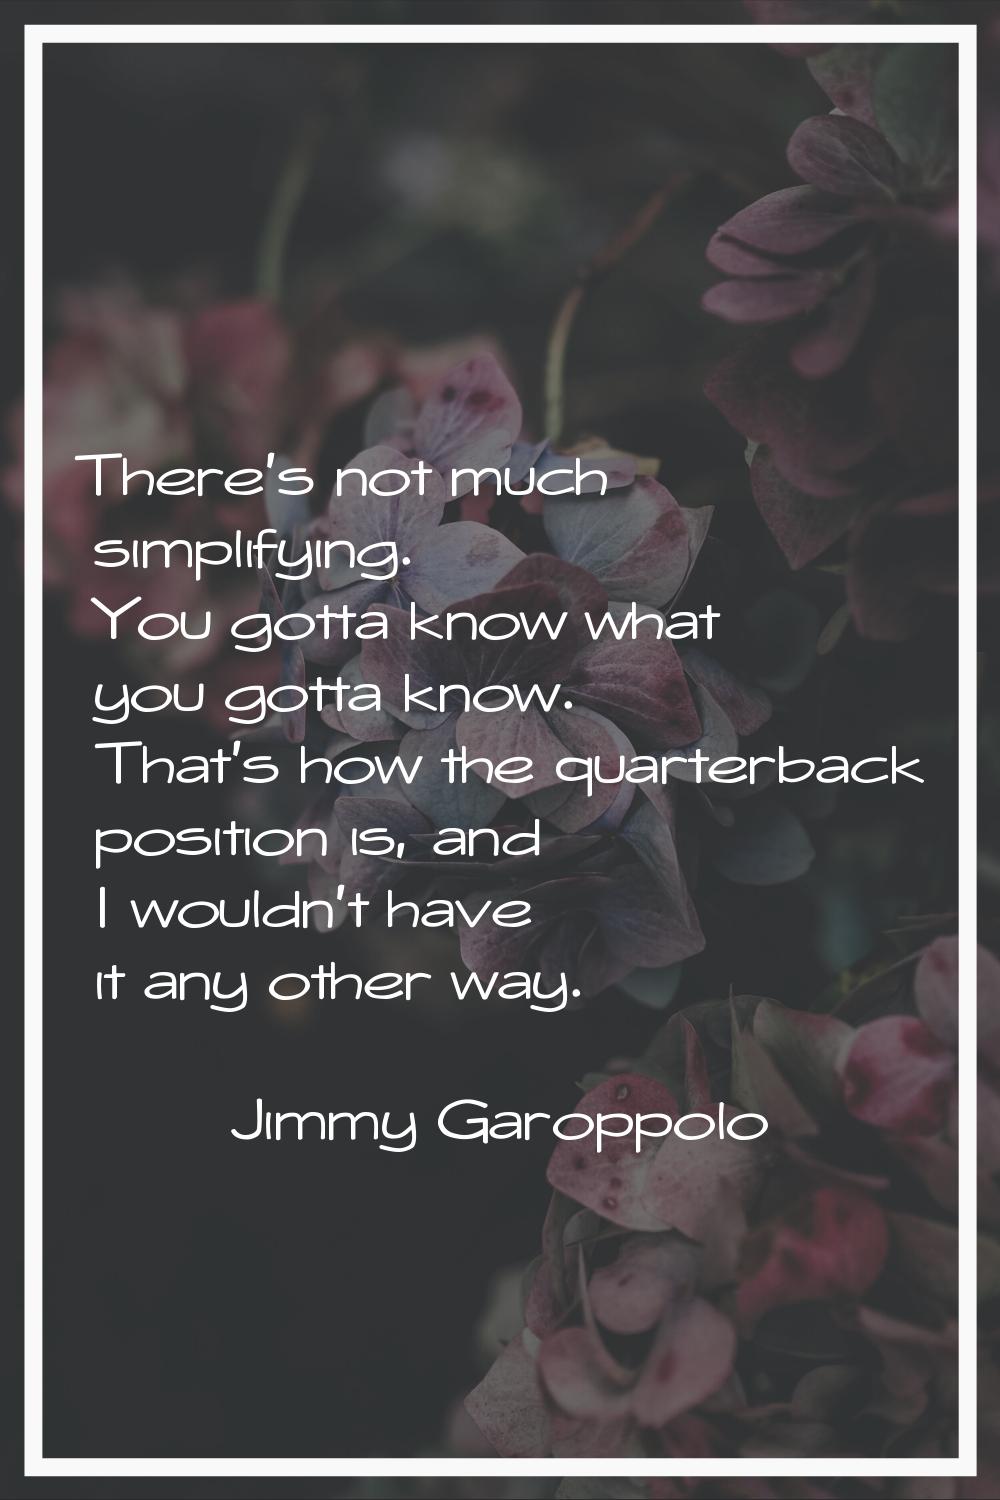 There's not much simplifying. You gotta know what you gotta know. That's how the quarterback positi